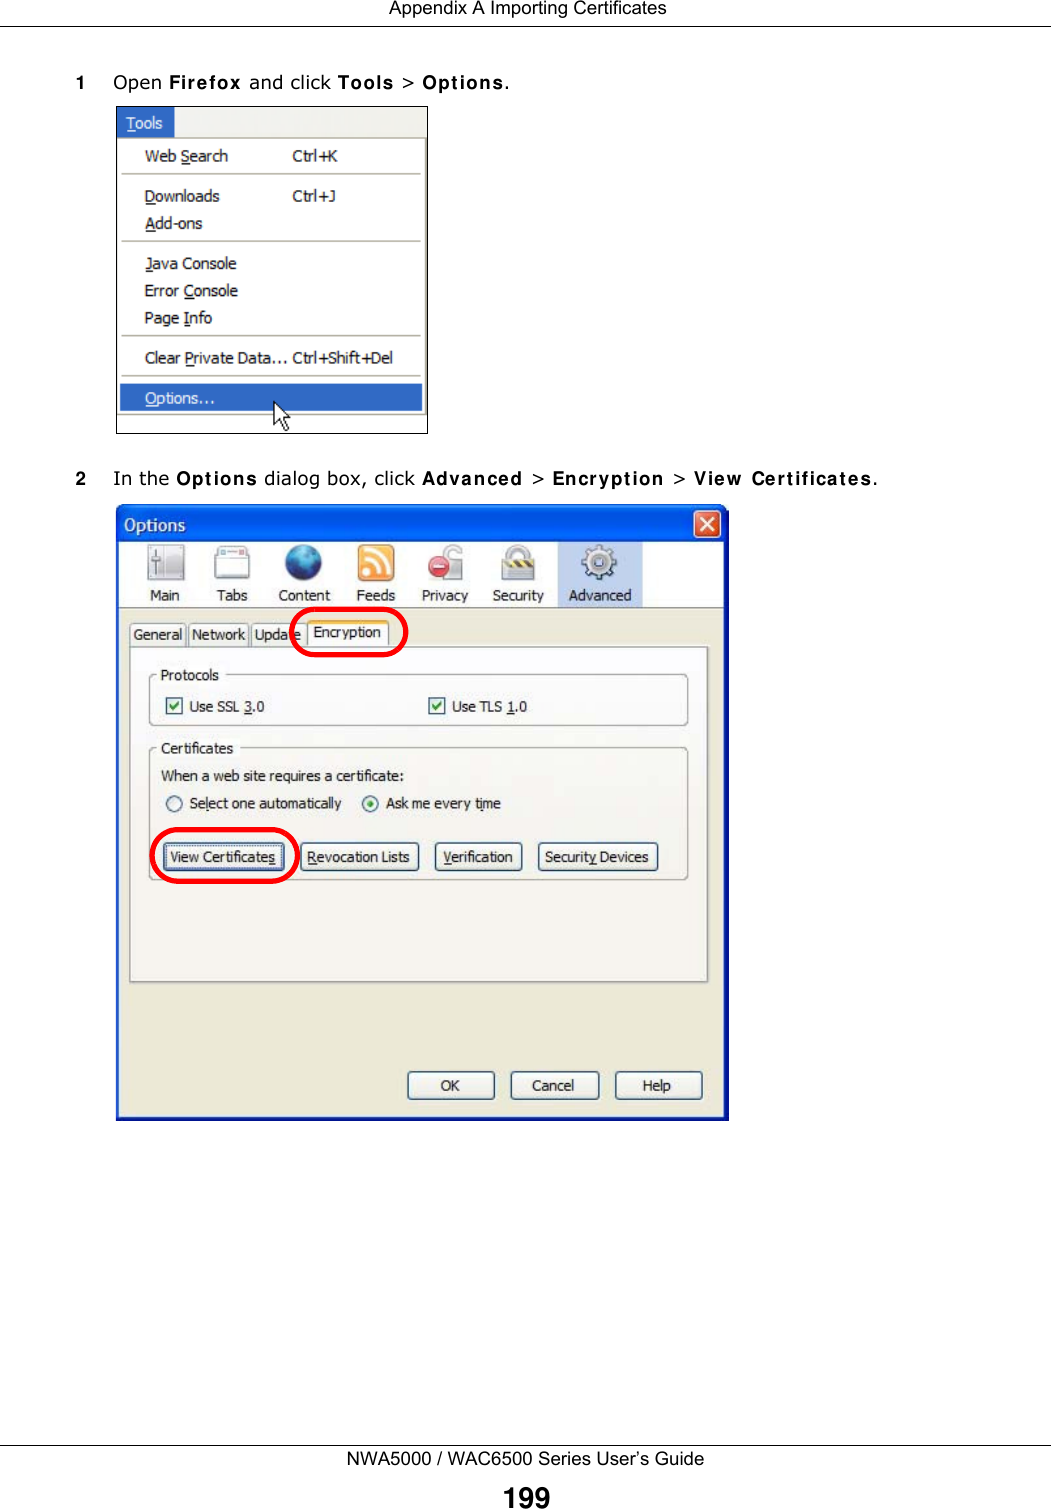  Appendix A Importing CertificatesNWA5000 / WAC6500 Series User’s Guide1991Open Fir efox  and click Tools &gt; Opt ions.2In the Opt ions dialog box, click Advance d &gt; En cr y pt ion &gt; Vie w  Ce rt ificat e s.